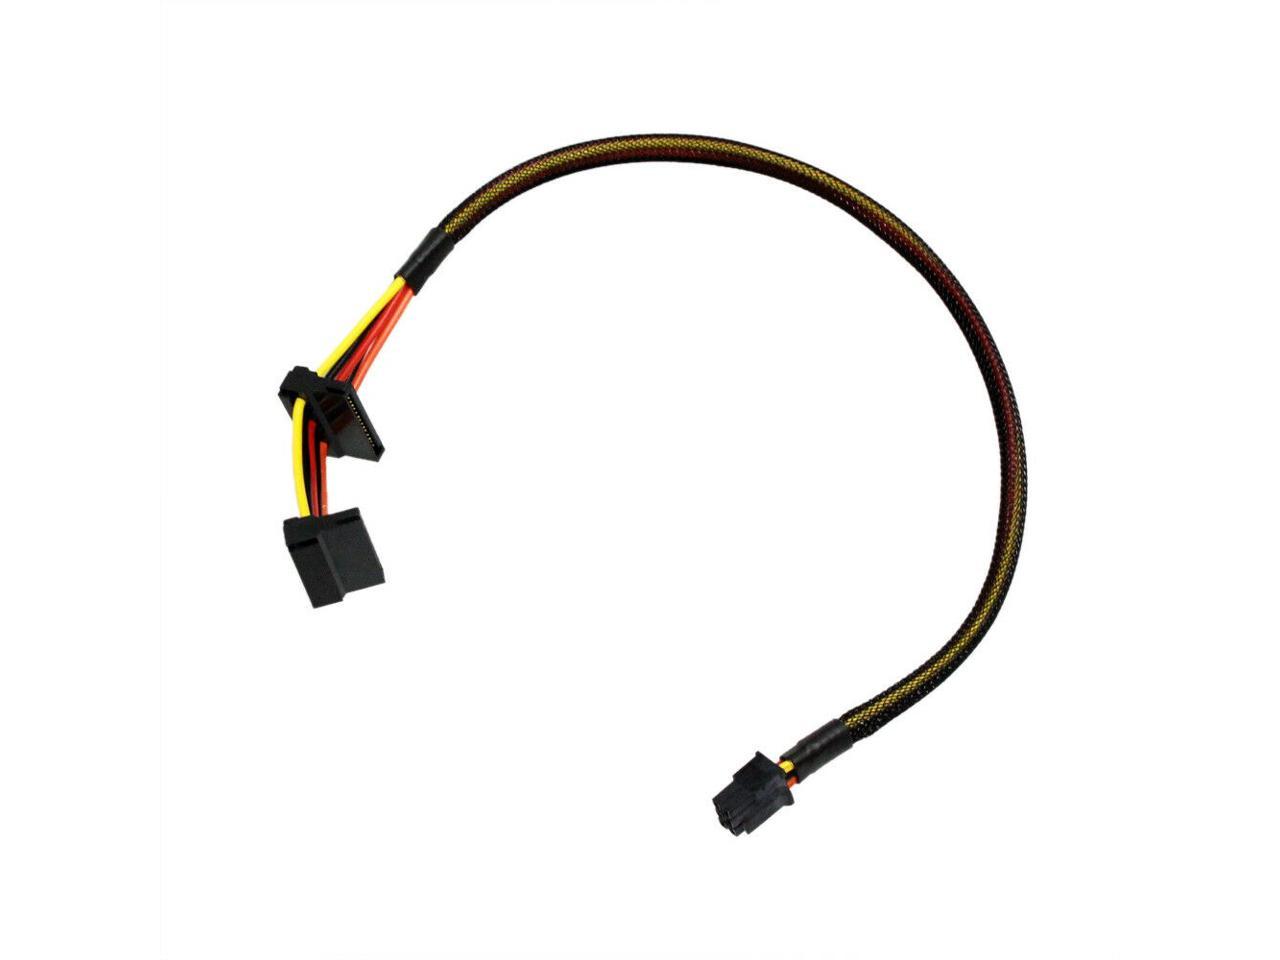 HDD SATA Power Cable For Dell X9FV3 Dell Inspiron 3653 3650 SK01 